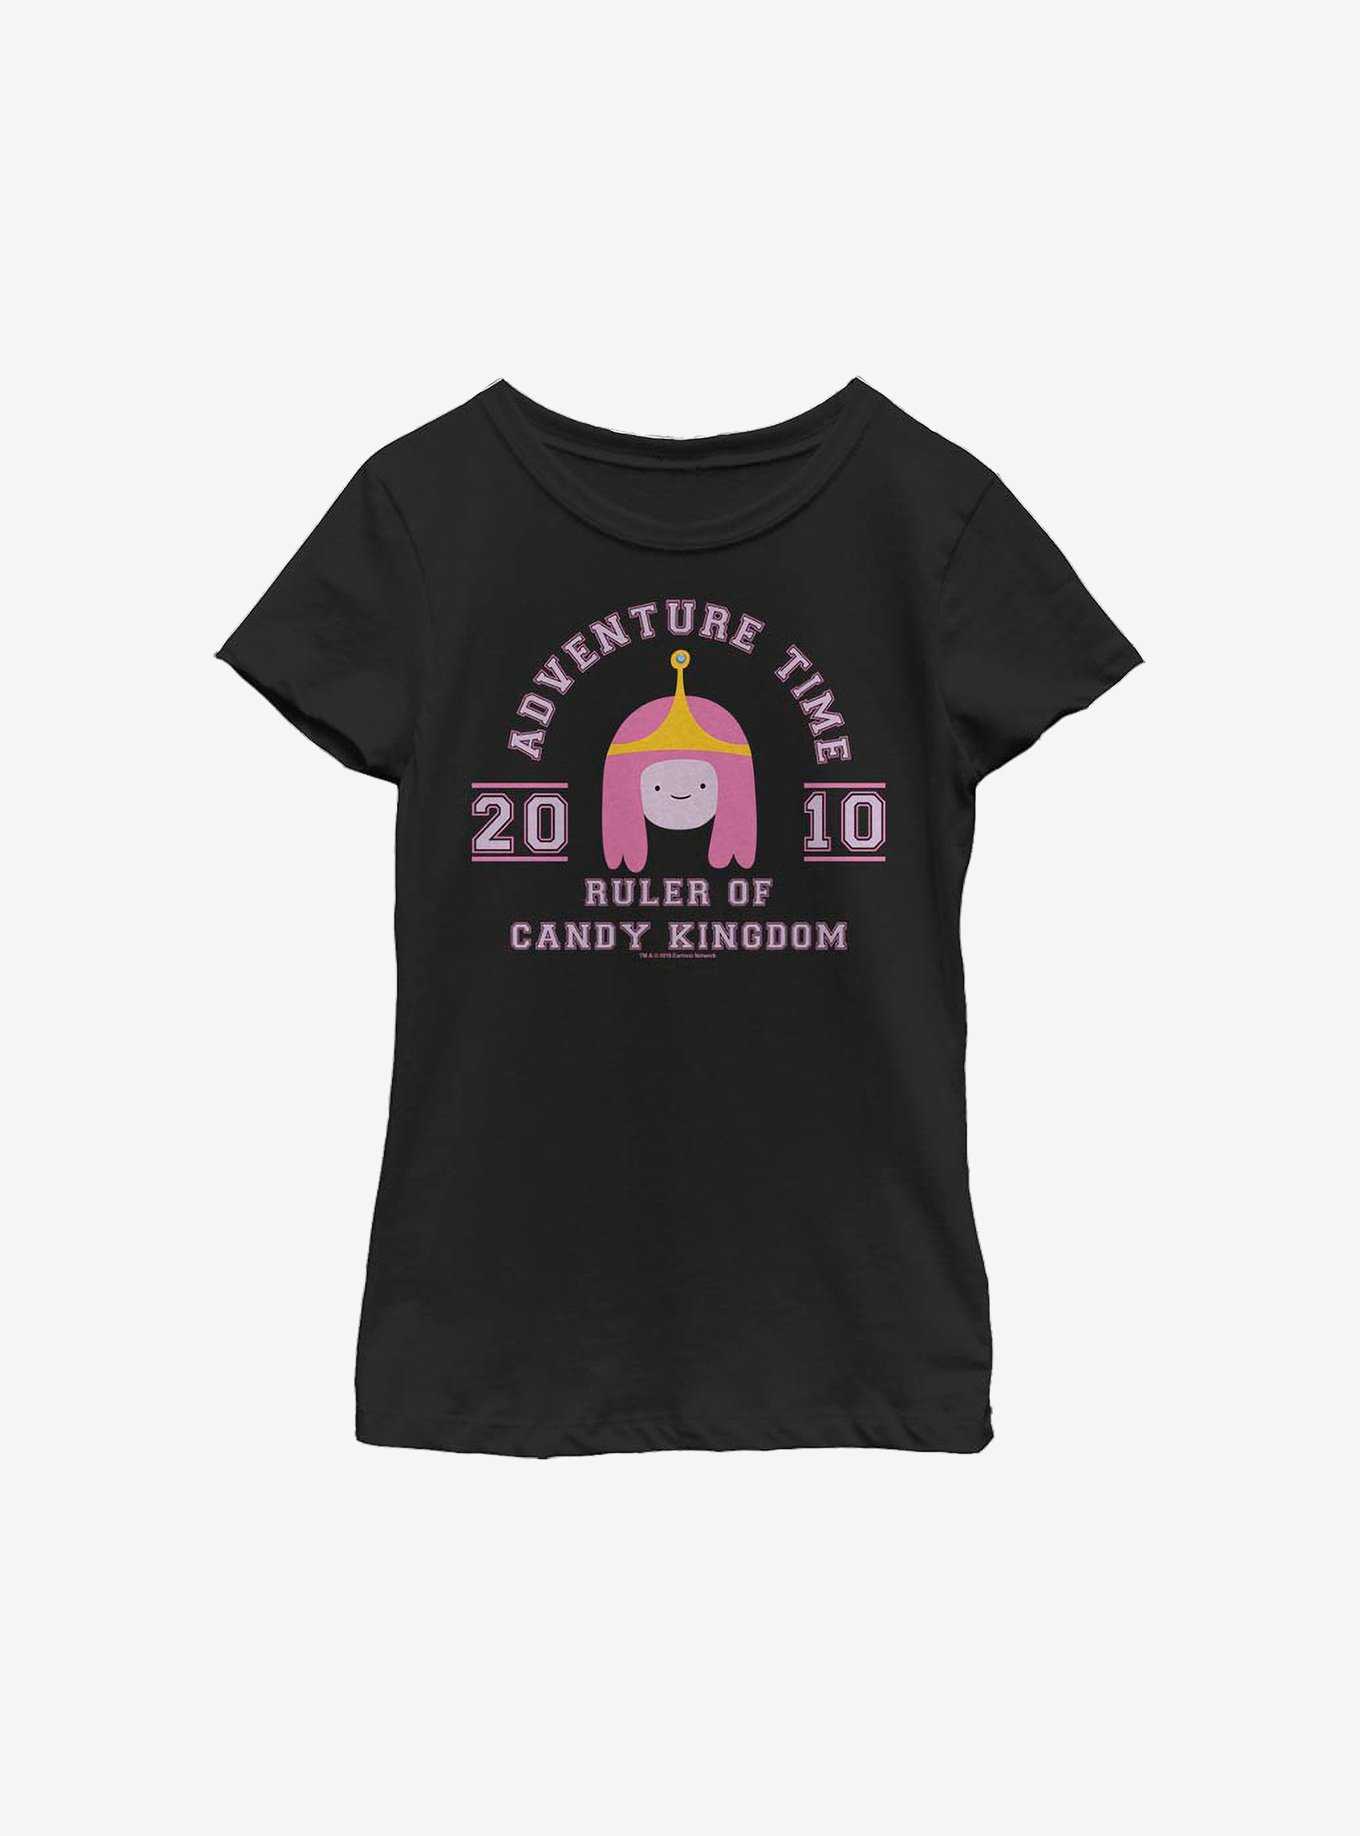 Adventure Time Ruler Of Candy Kingdom 2010 Youth Girls T-Shirt, , hi-res